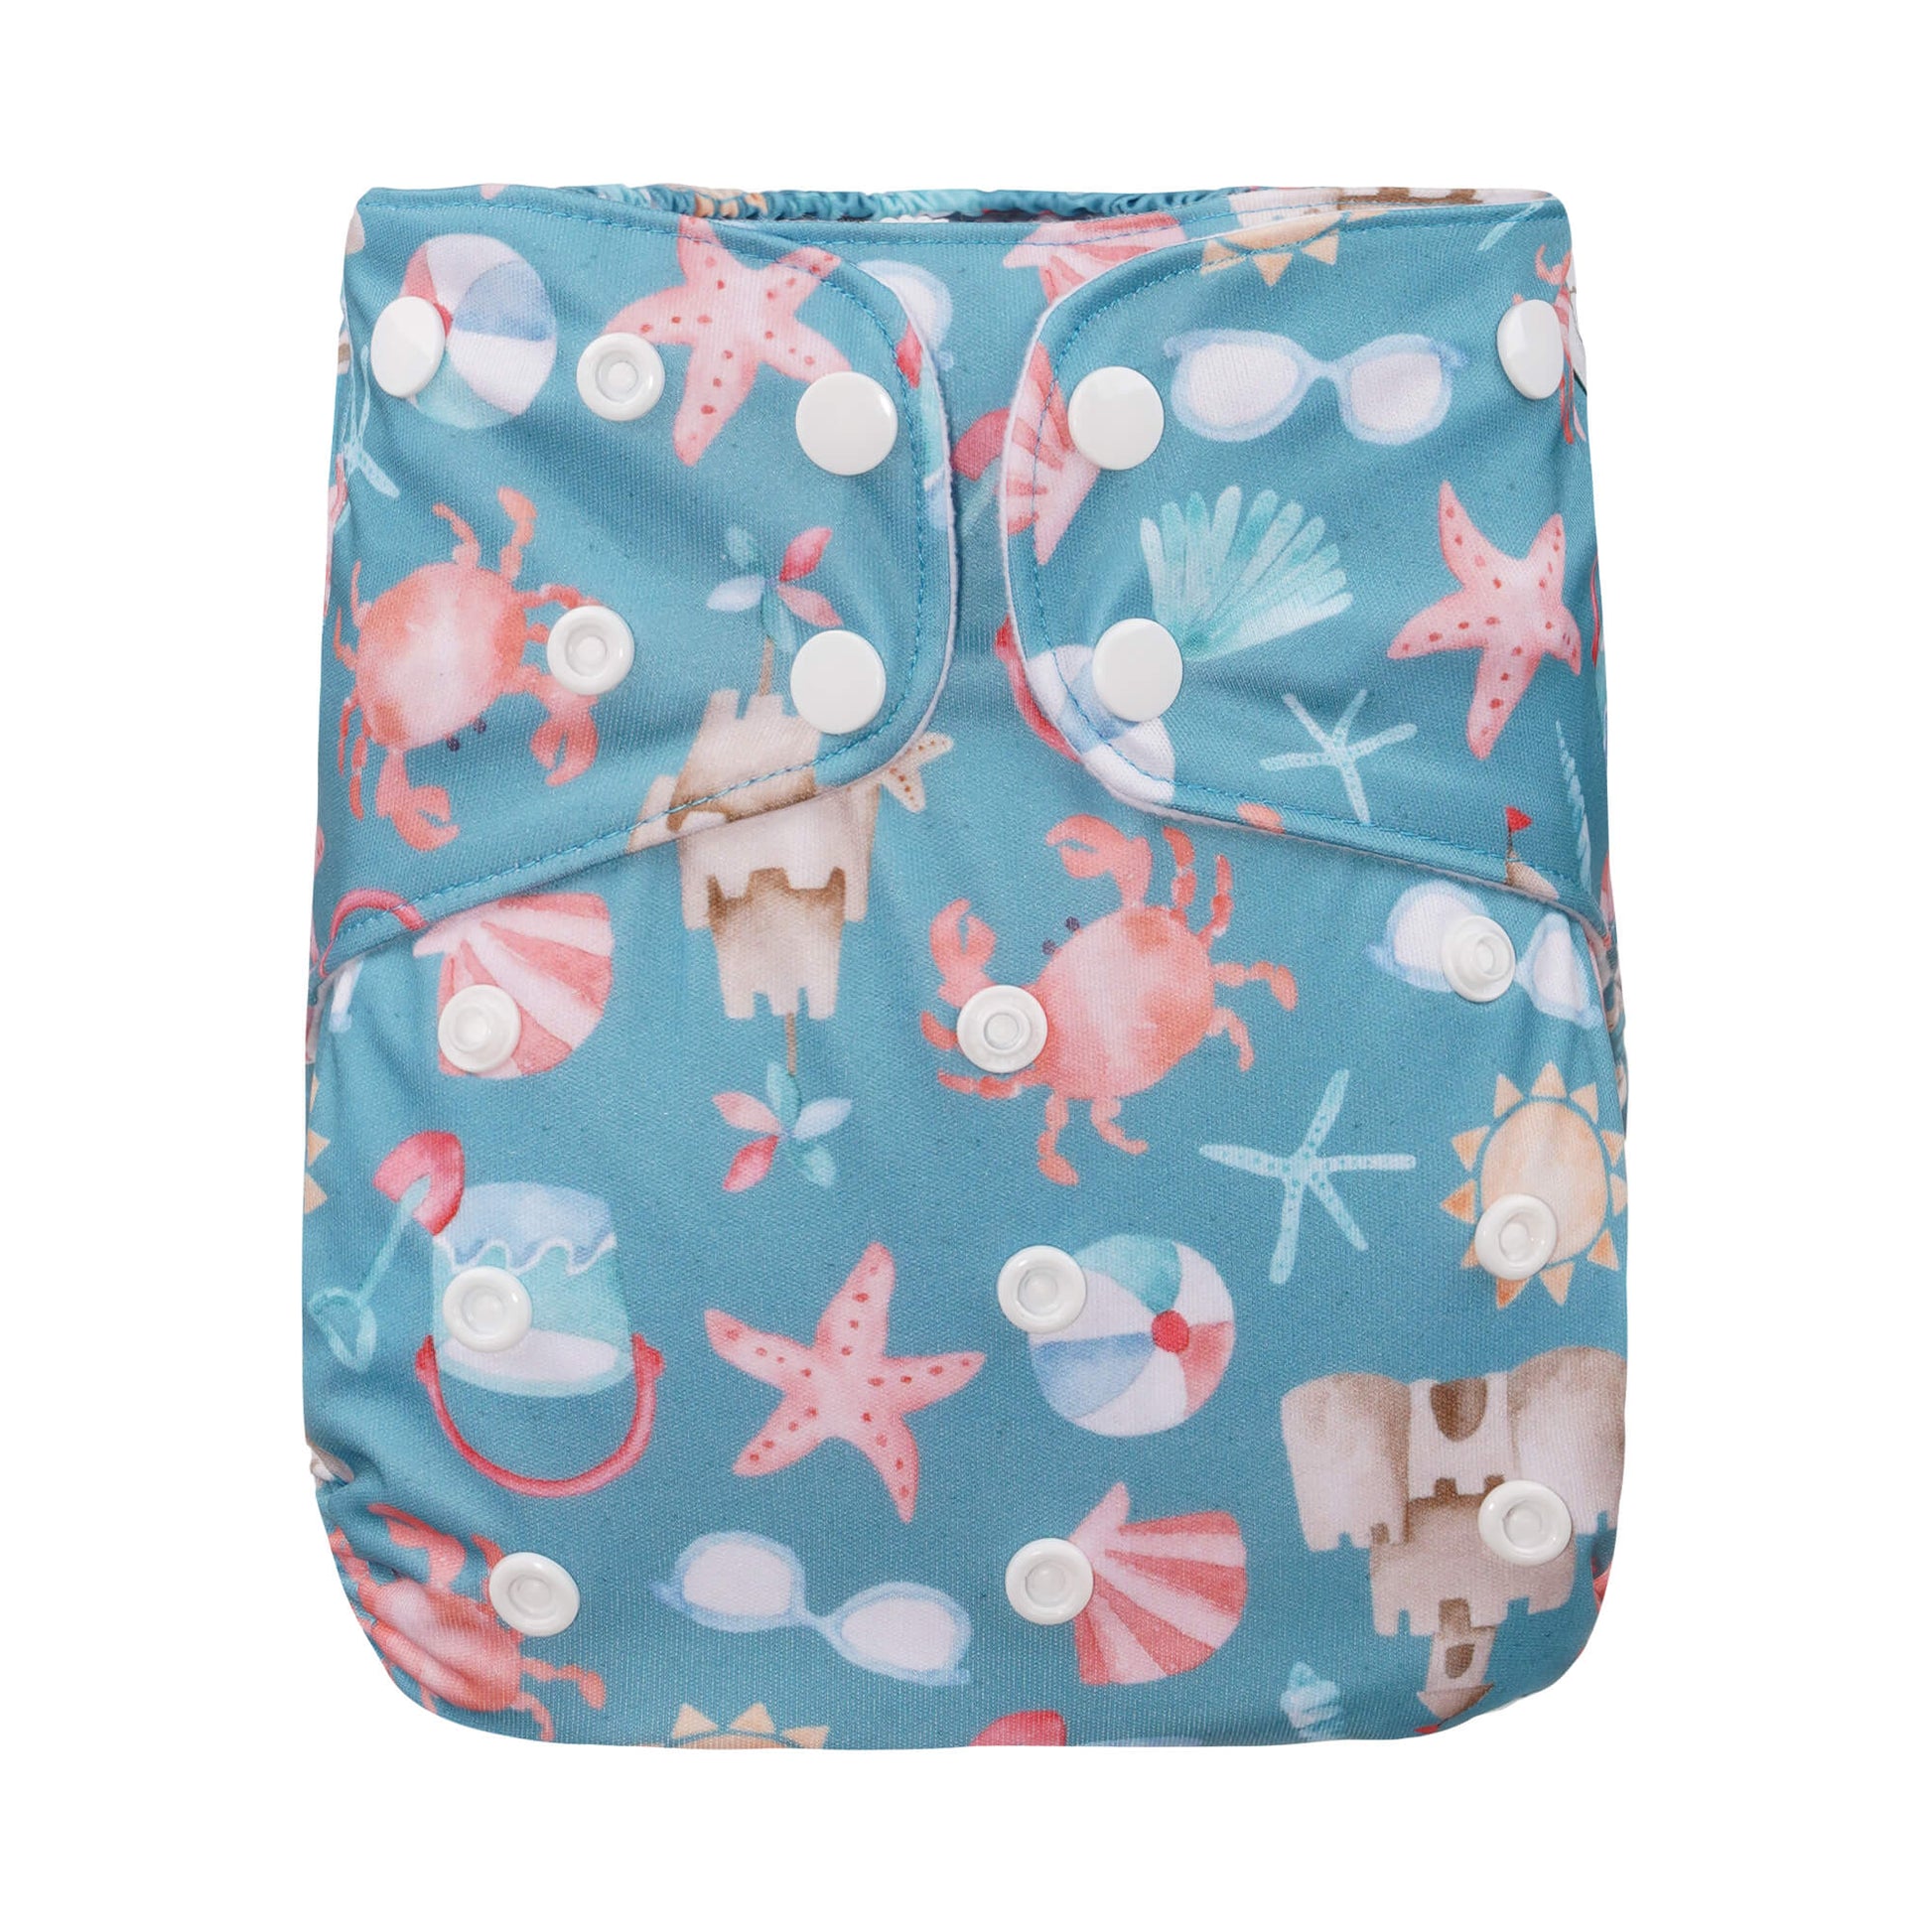 Best NZ Reusable Large Cloth Nappies, Microfibre Nappy